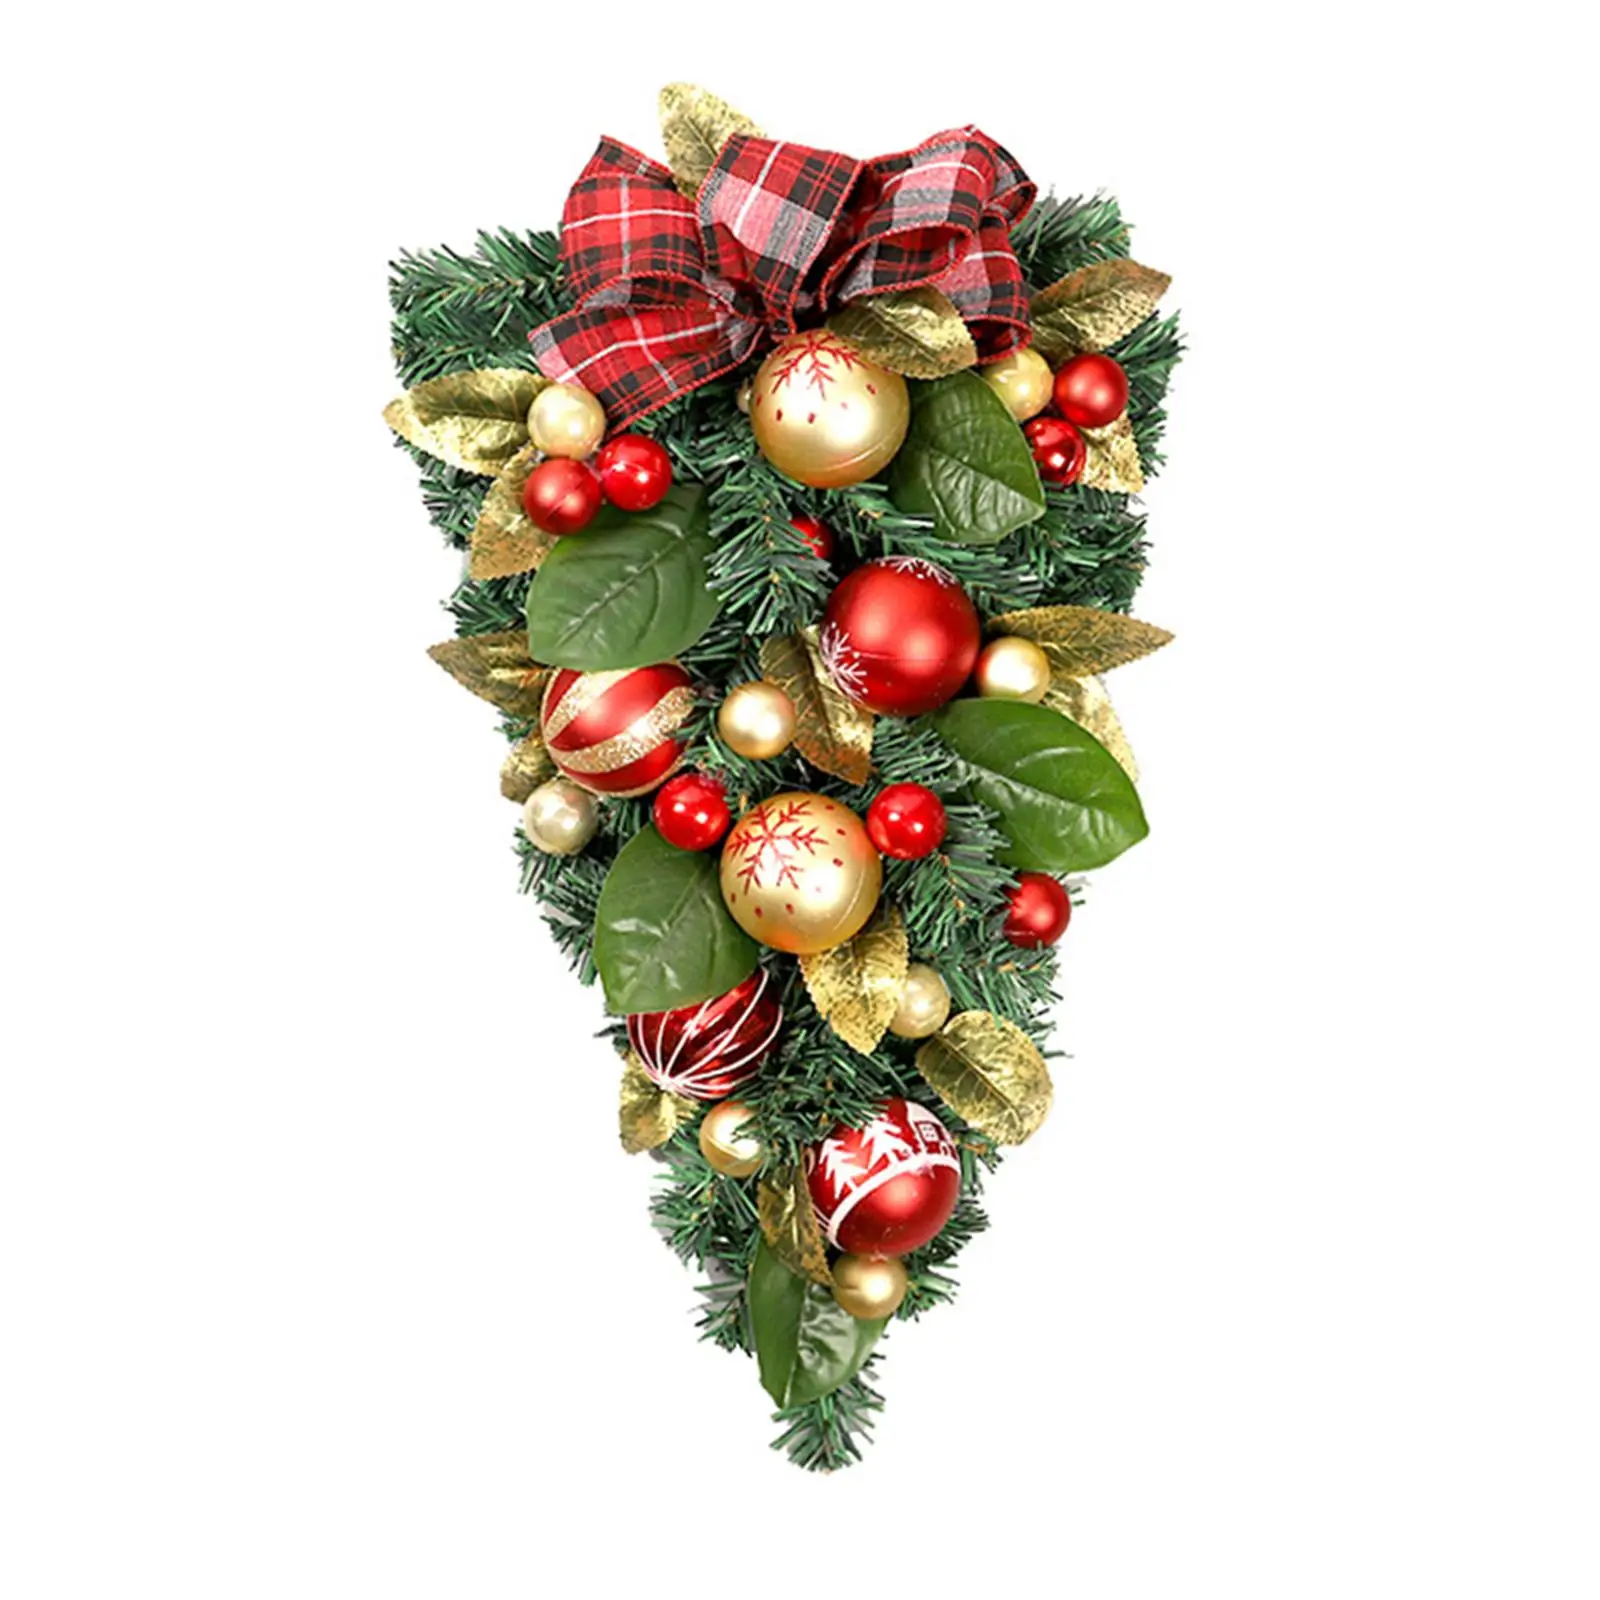 20 inch Winter Artificial Christmas Teardrop Wreath Decorated with Ball Ornaments with Lights for Party Farmhouse Decoration